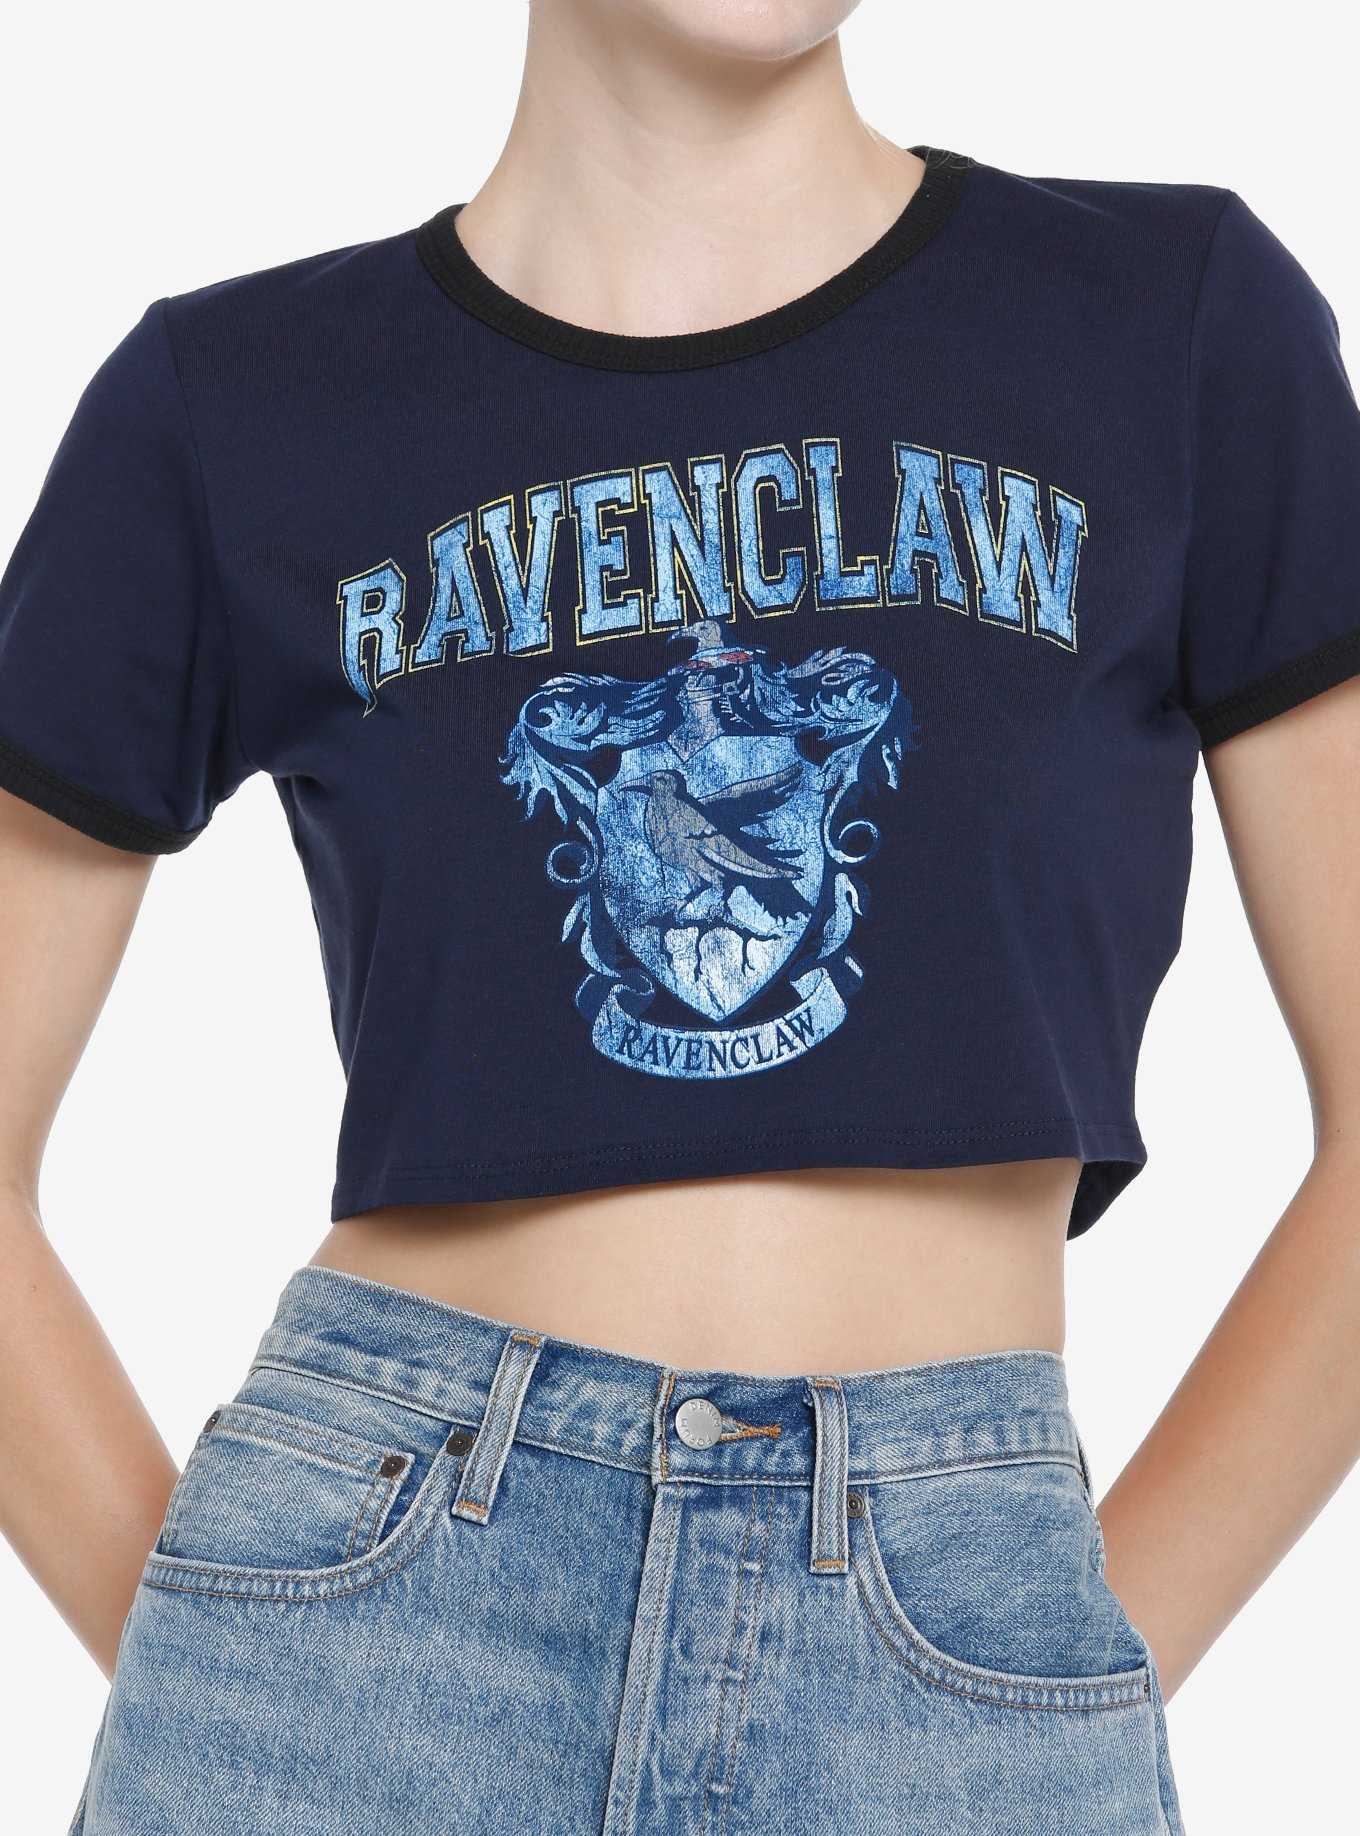 Harry Potter Ravenclaw Crest Sticker, Hot Topic